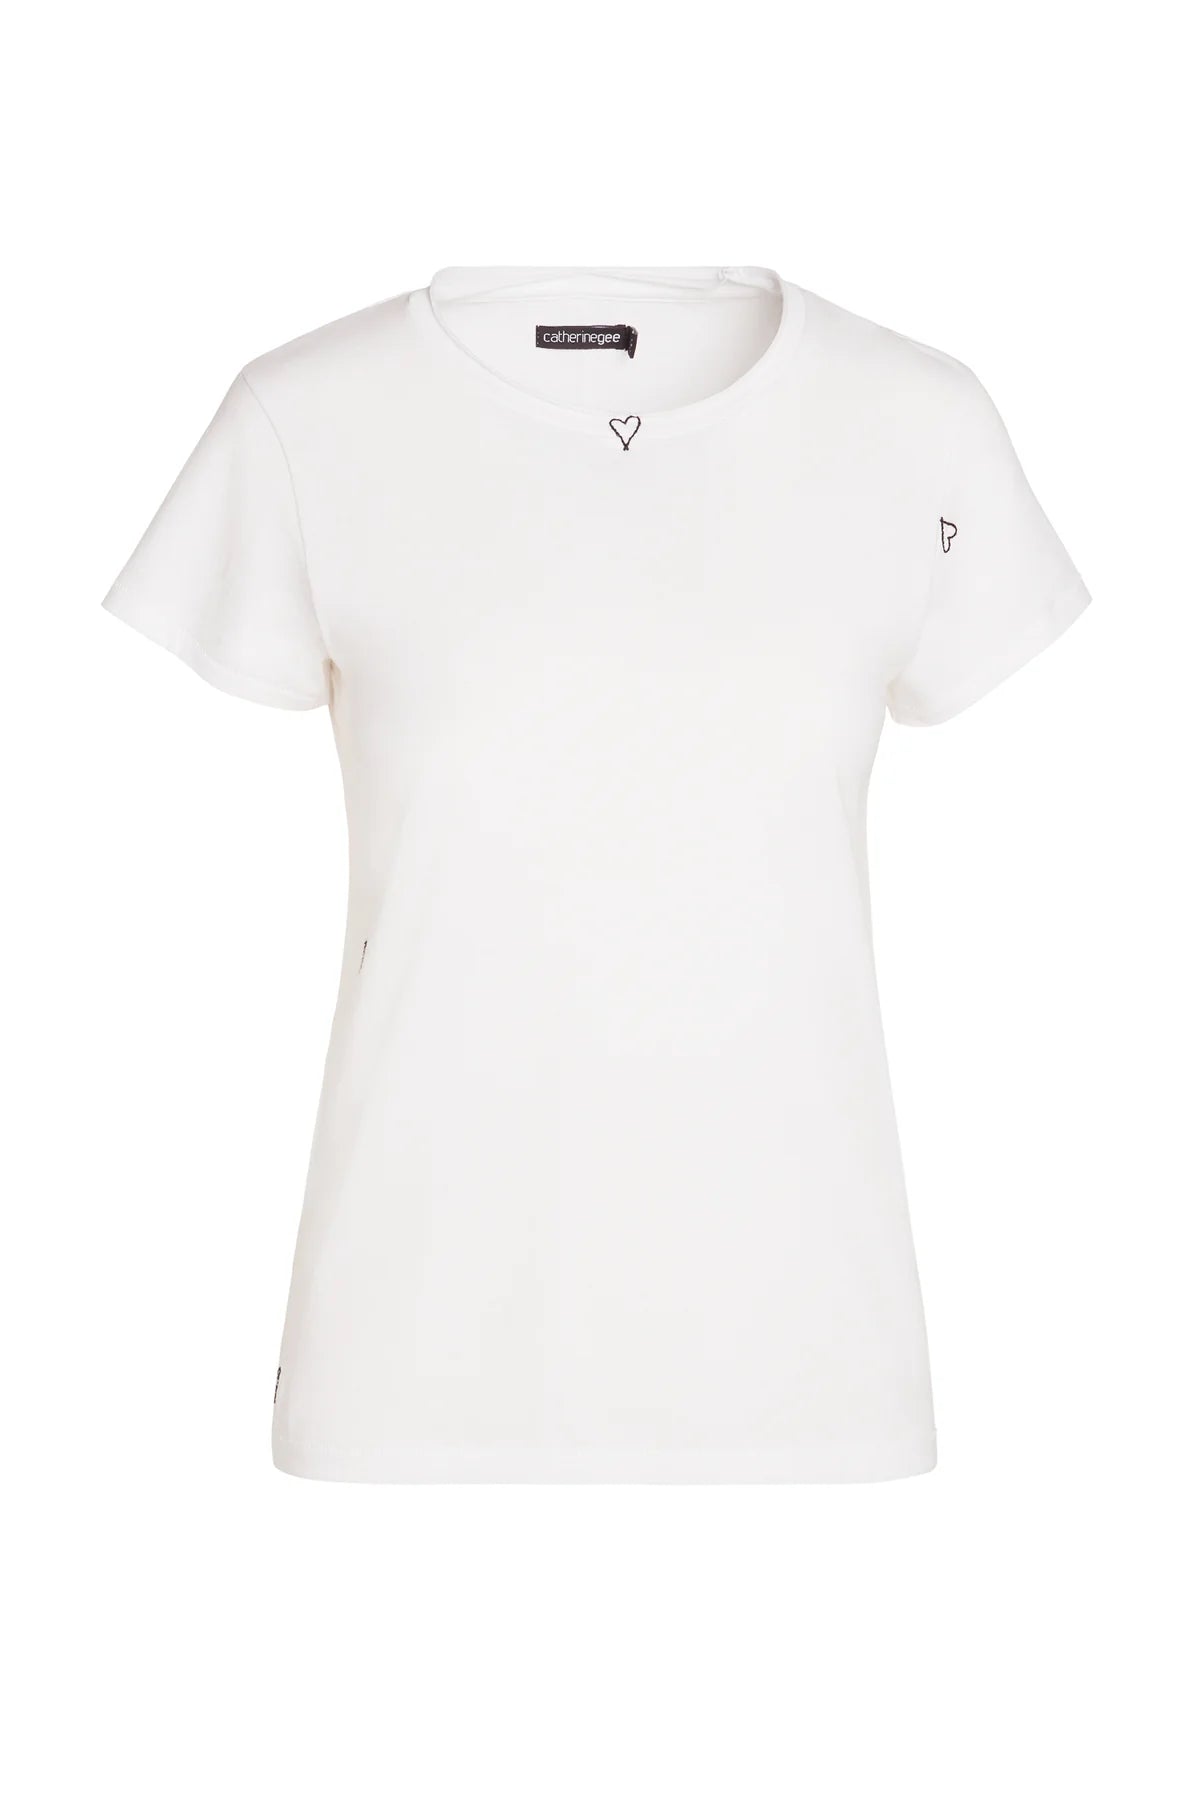 CATHERINE GEE- Embroidered Cotton T-Shirt White